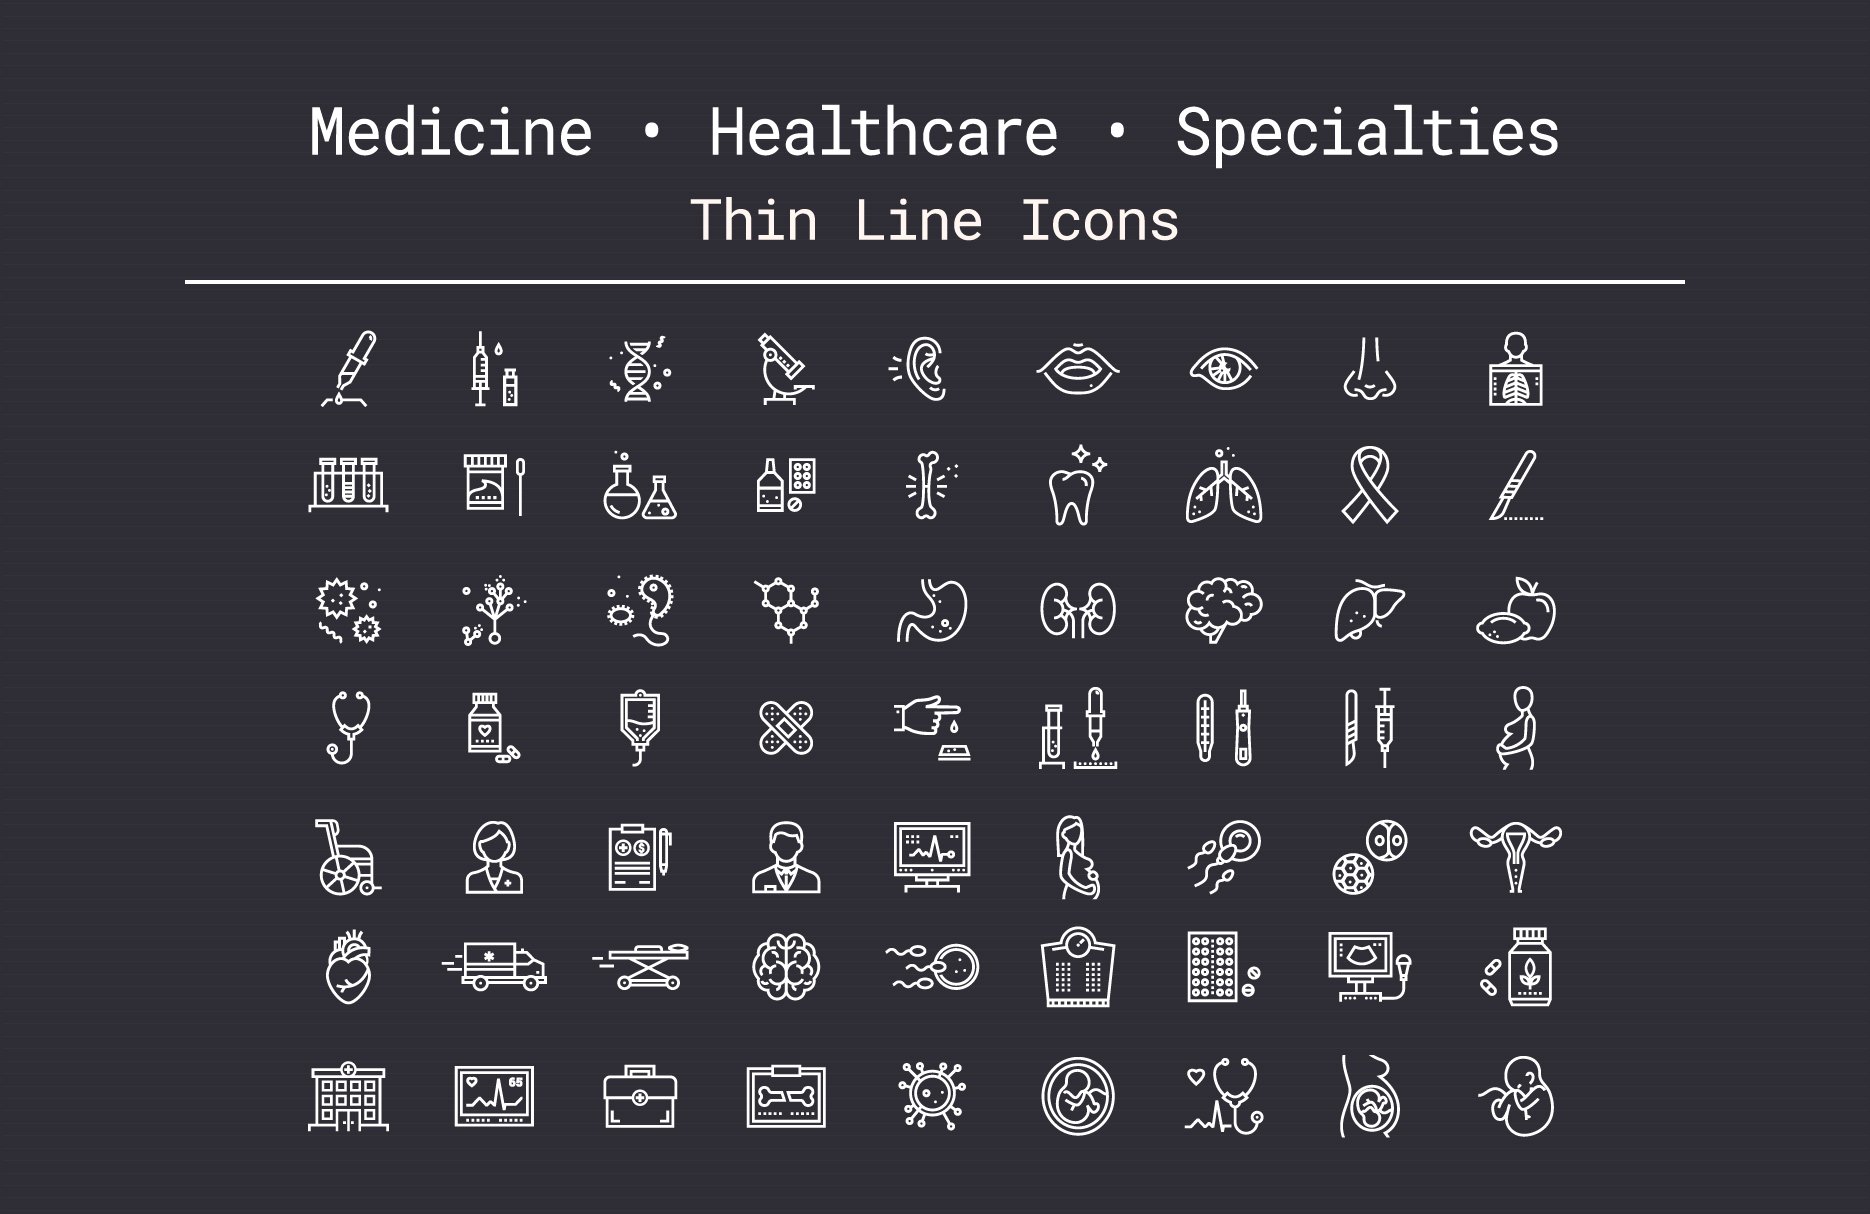 Medicine, Healthcare Thin Line Icons cover image.